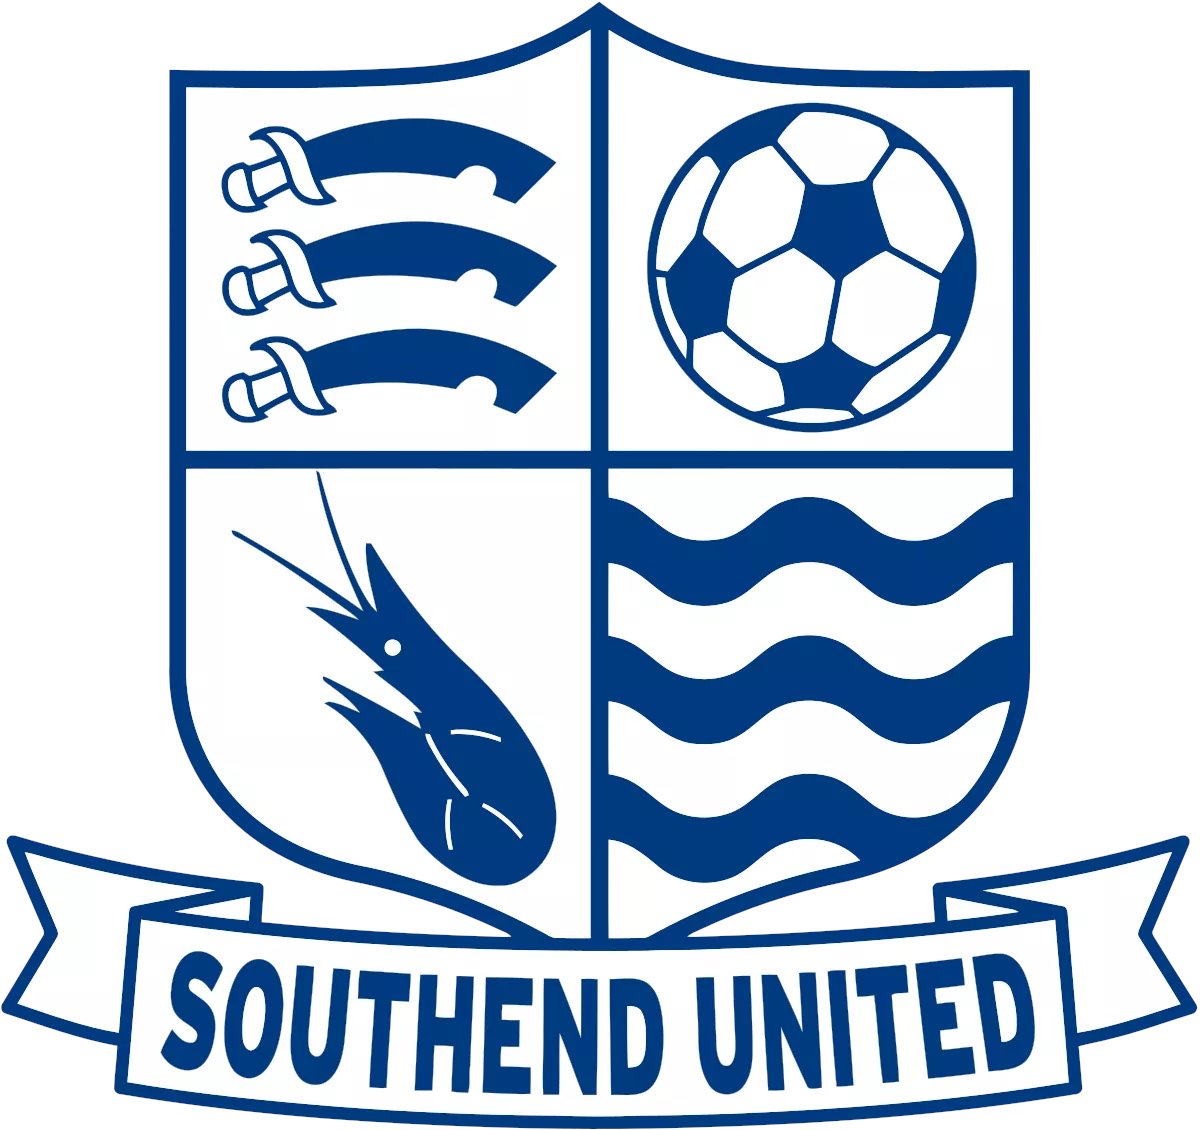 55) Southend Points: 120 Manager: Tony Adams Not a lot of stars in the team (apart from Tony Adams, obviously). But quite a solid and functional starting XI in fairness to Southend.